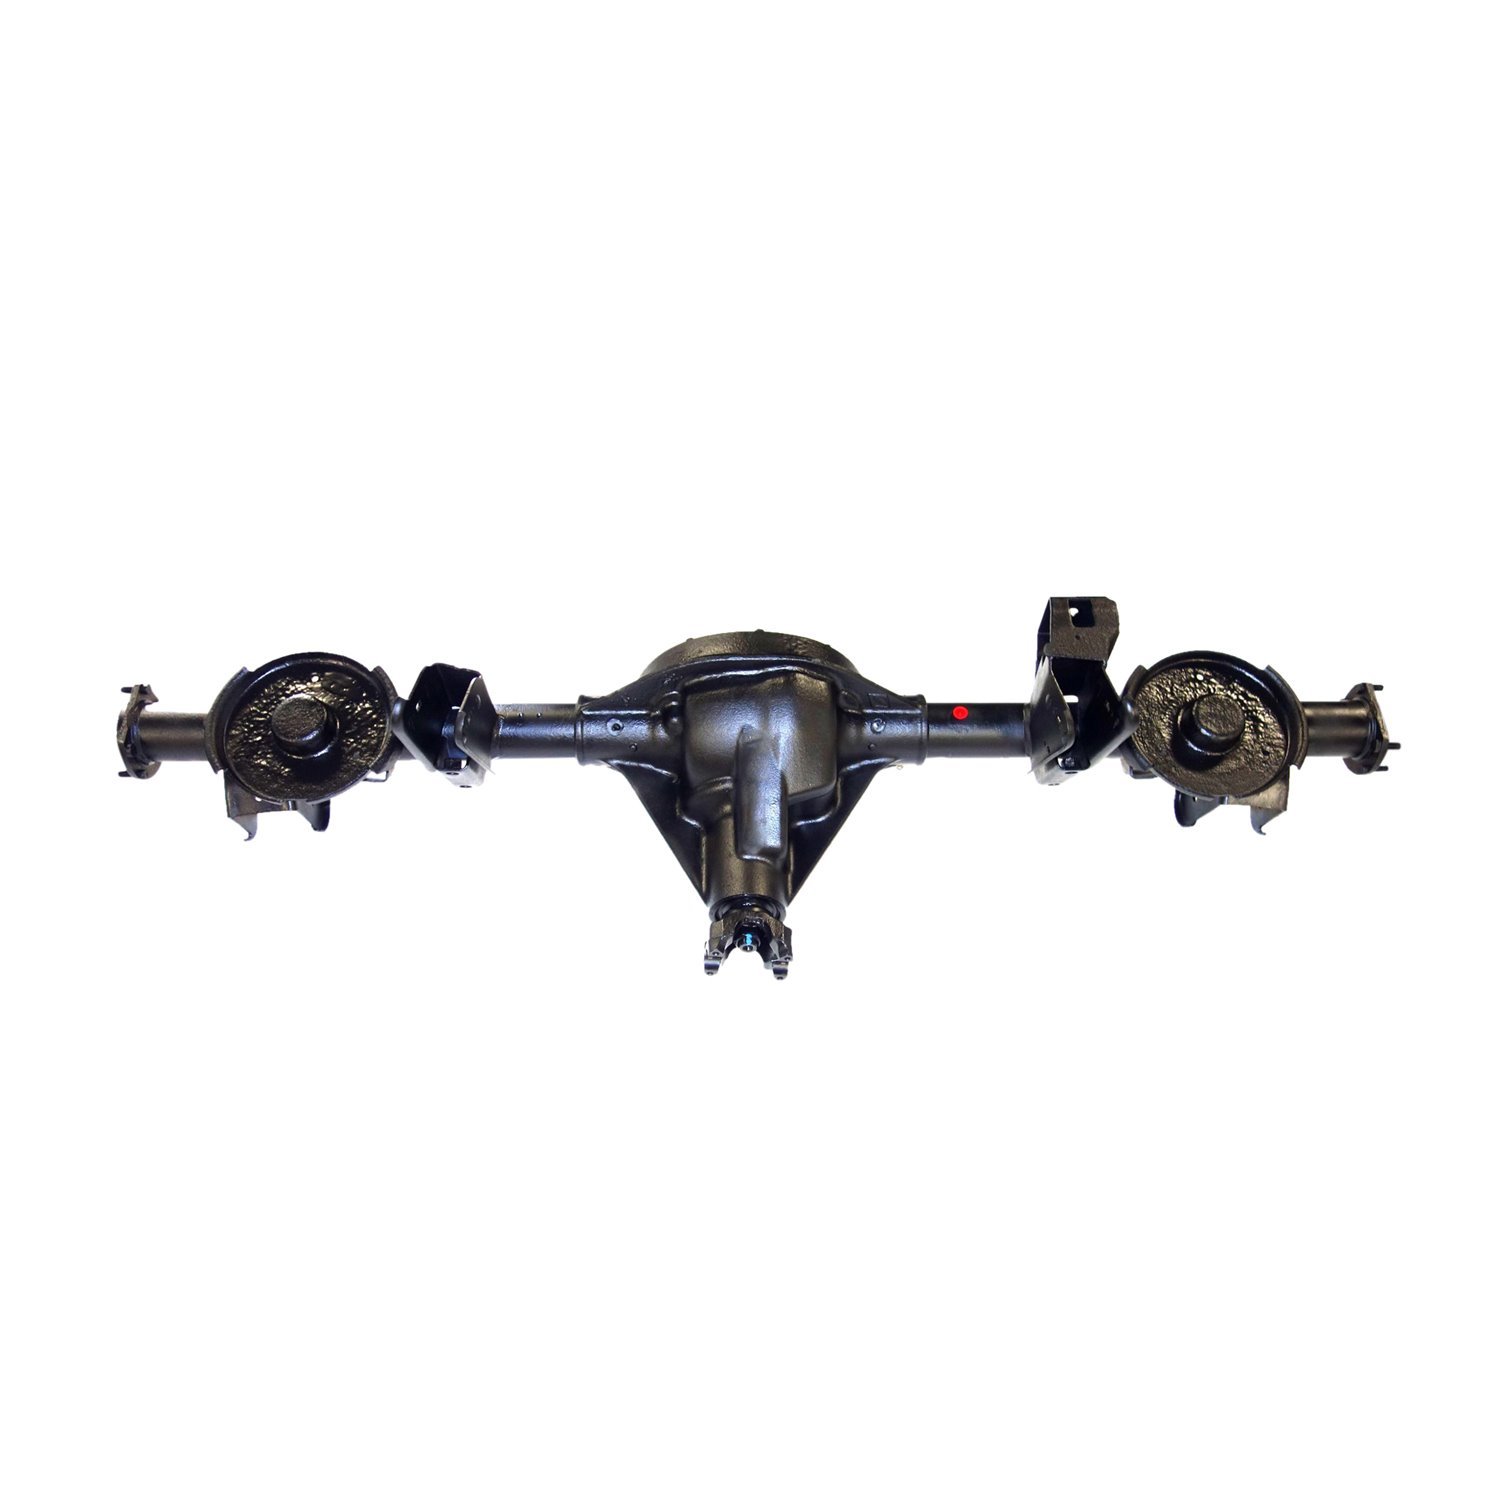 Remanufactured Complete Axle Assembly for Dana 35 97-02 Jeep Wrangler 4.11 Ratio w/o ABS